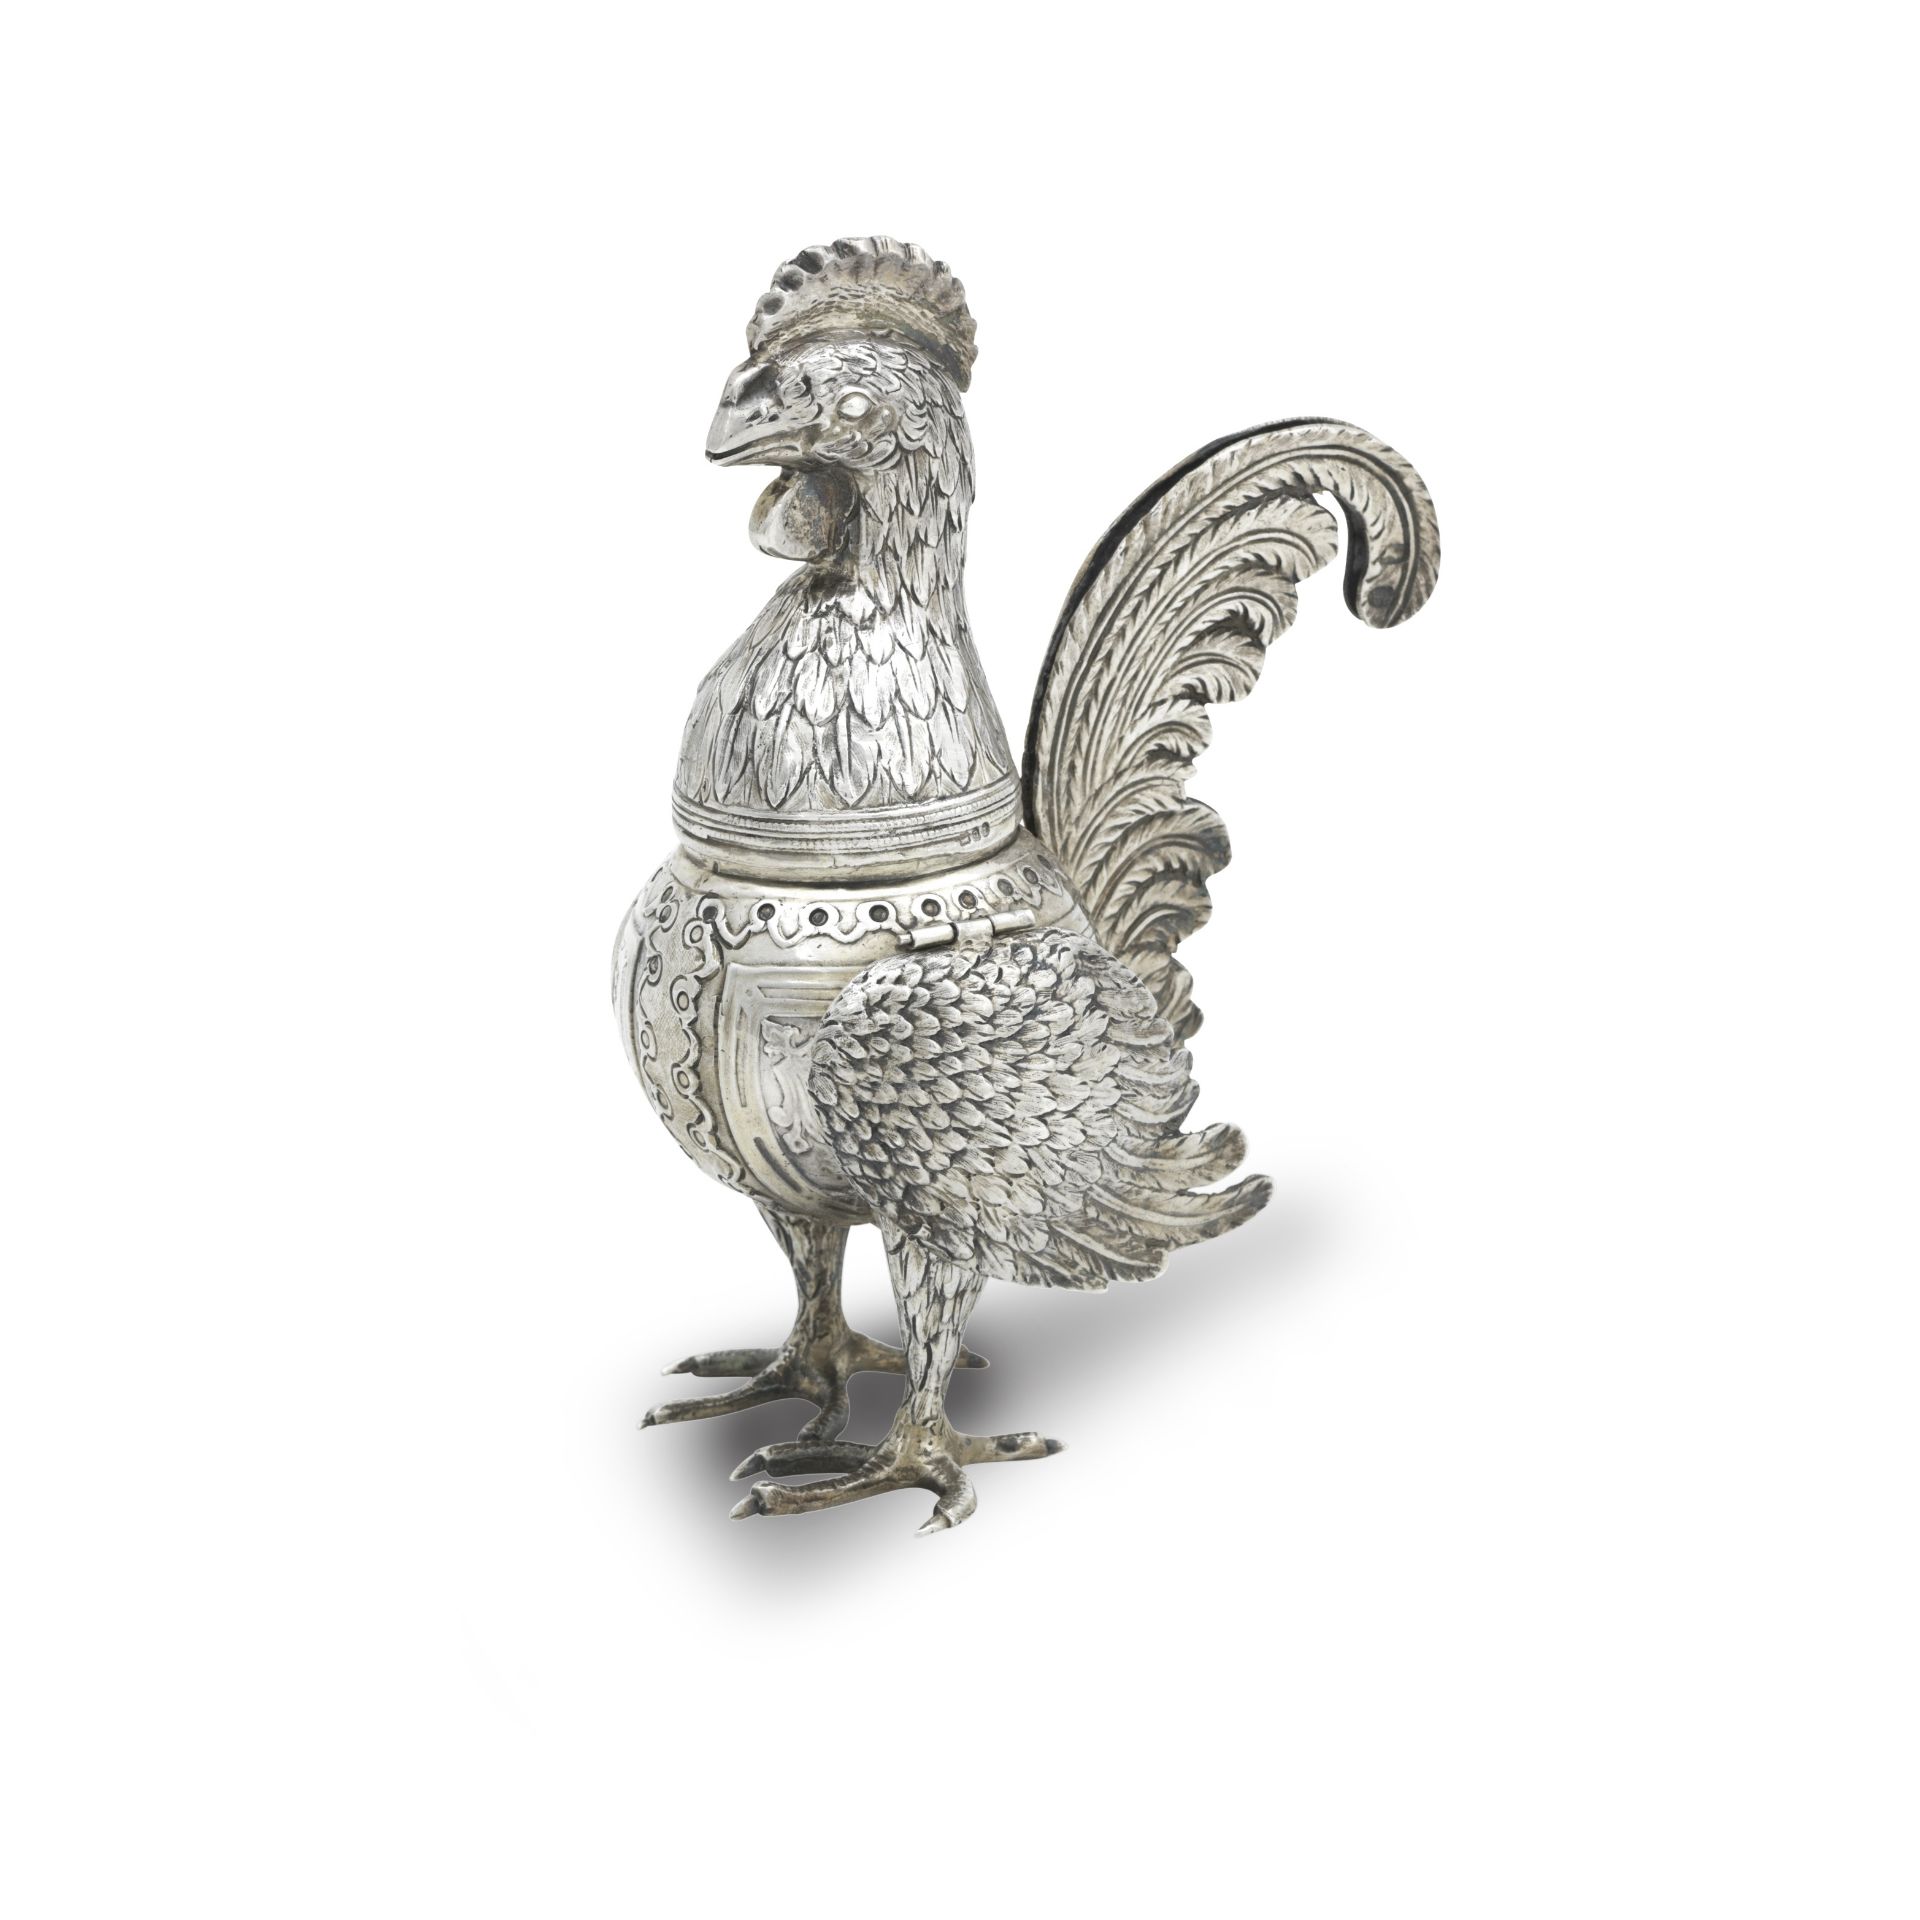 A CONTINENTAL SILVER COCKEREL POMMANDER With import marks for Bertold Muller, Chester 1899